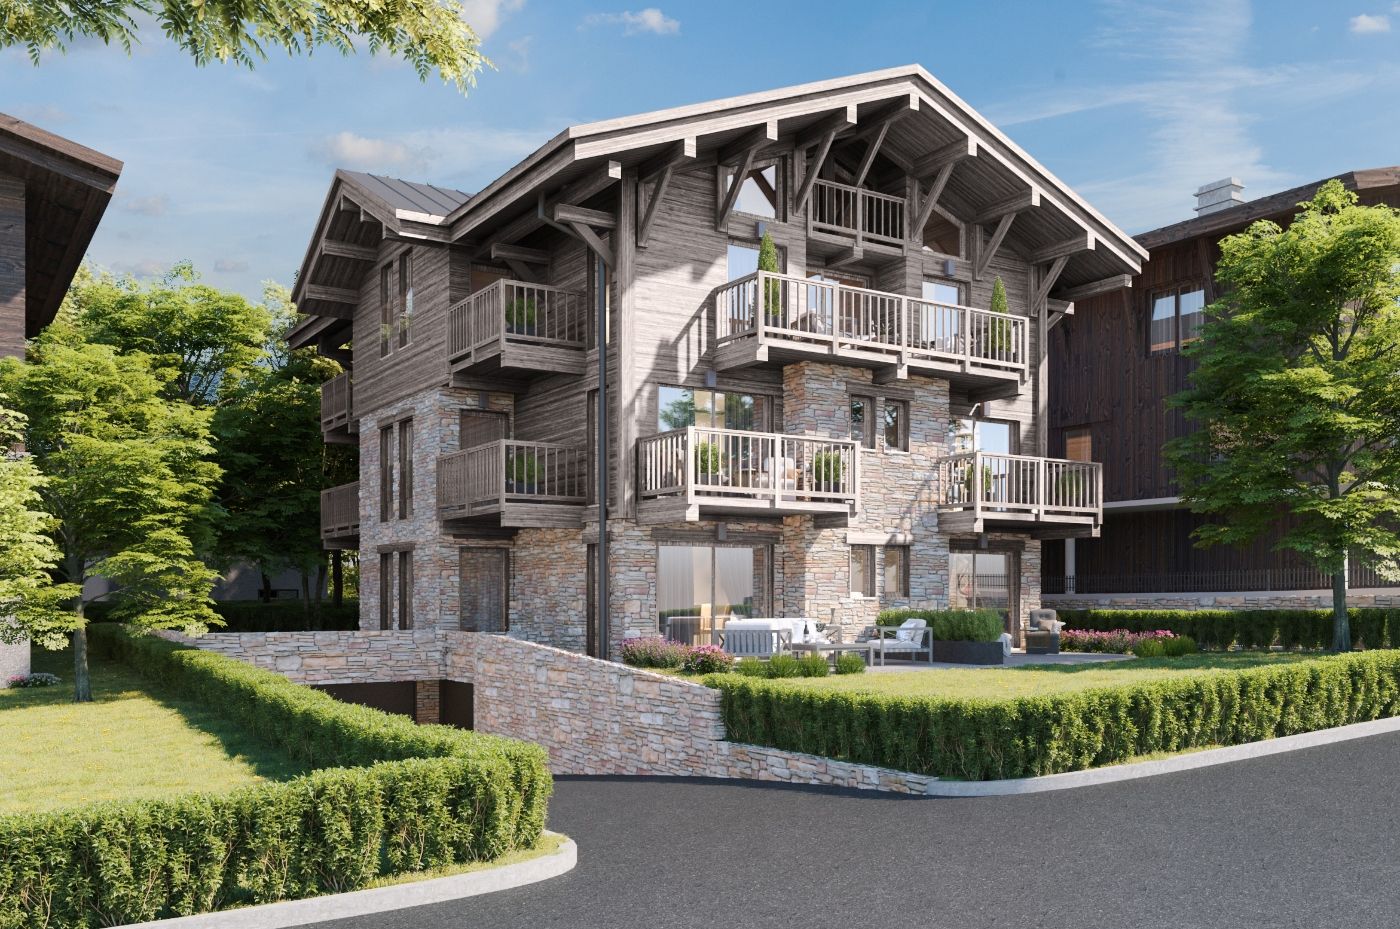 4 bed Apartment For Sale in Portes du Soleil, French Alps